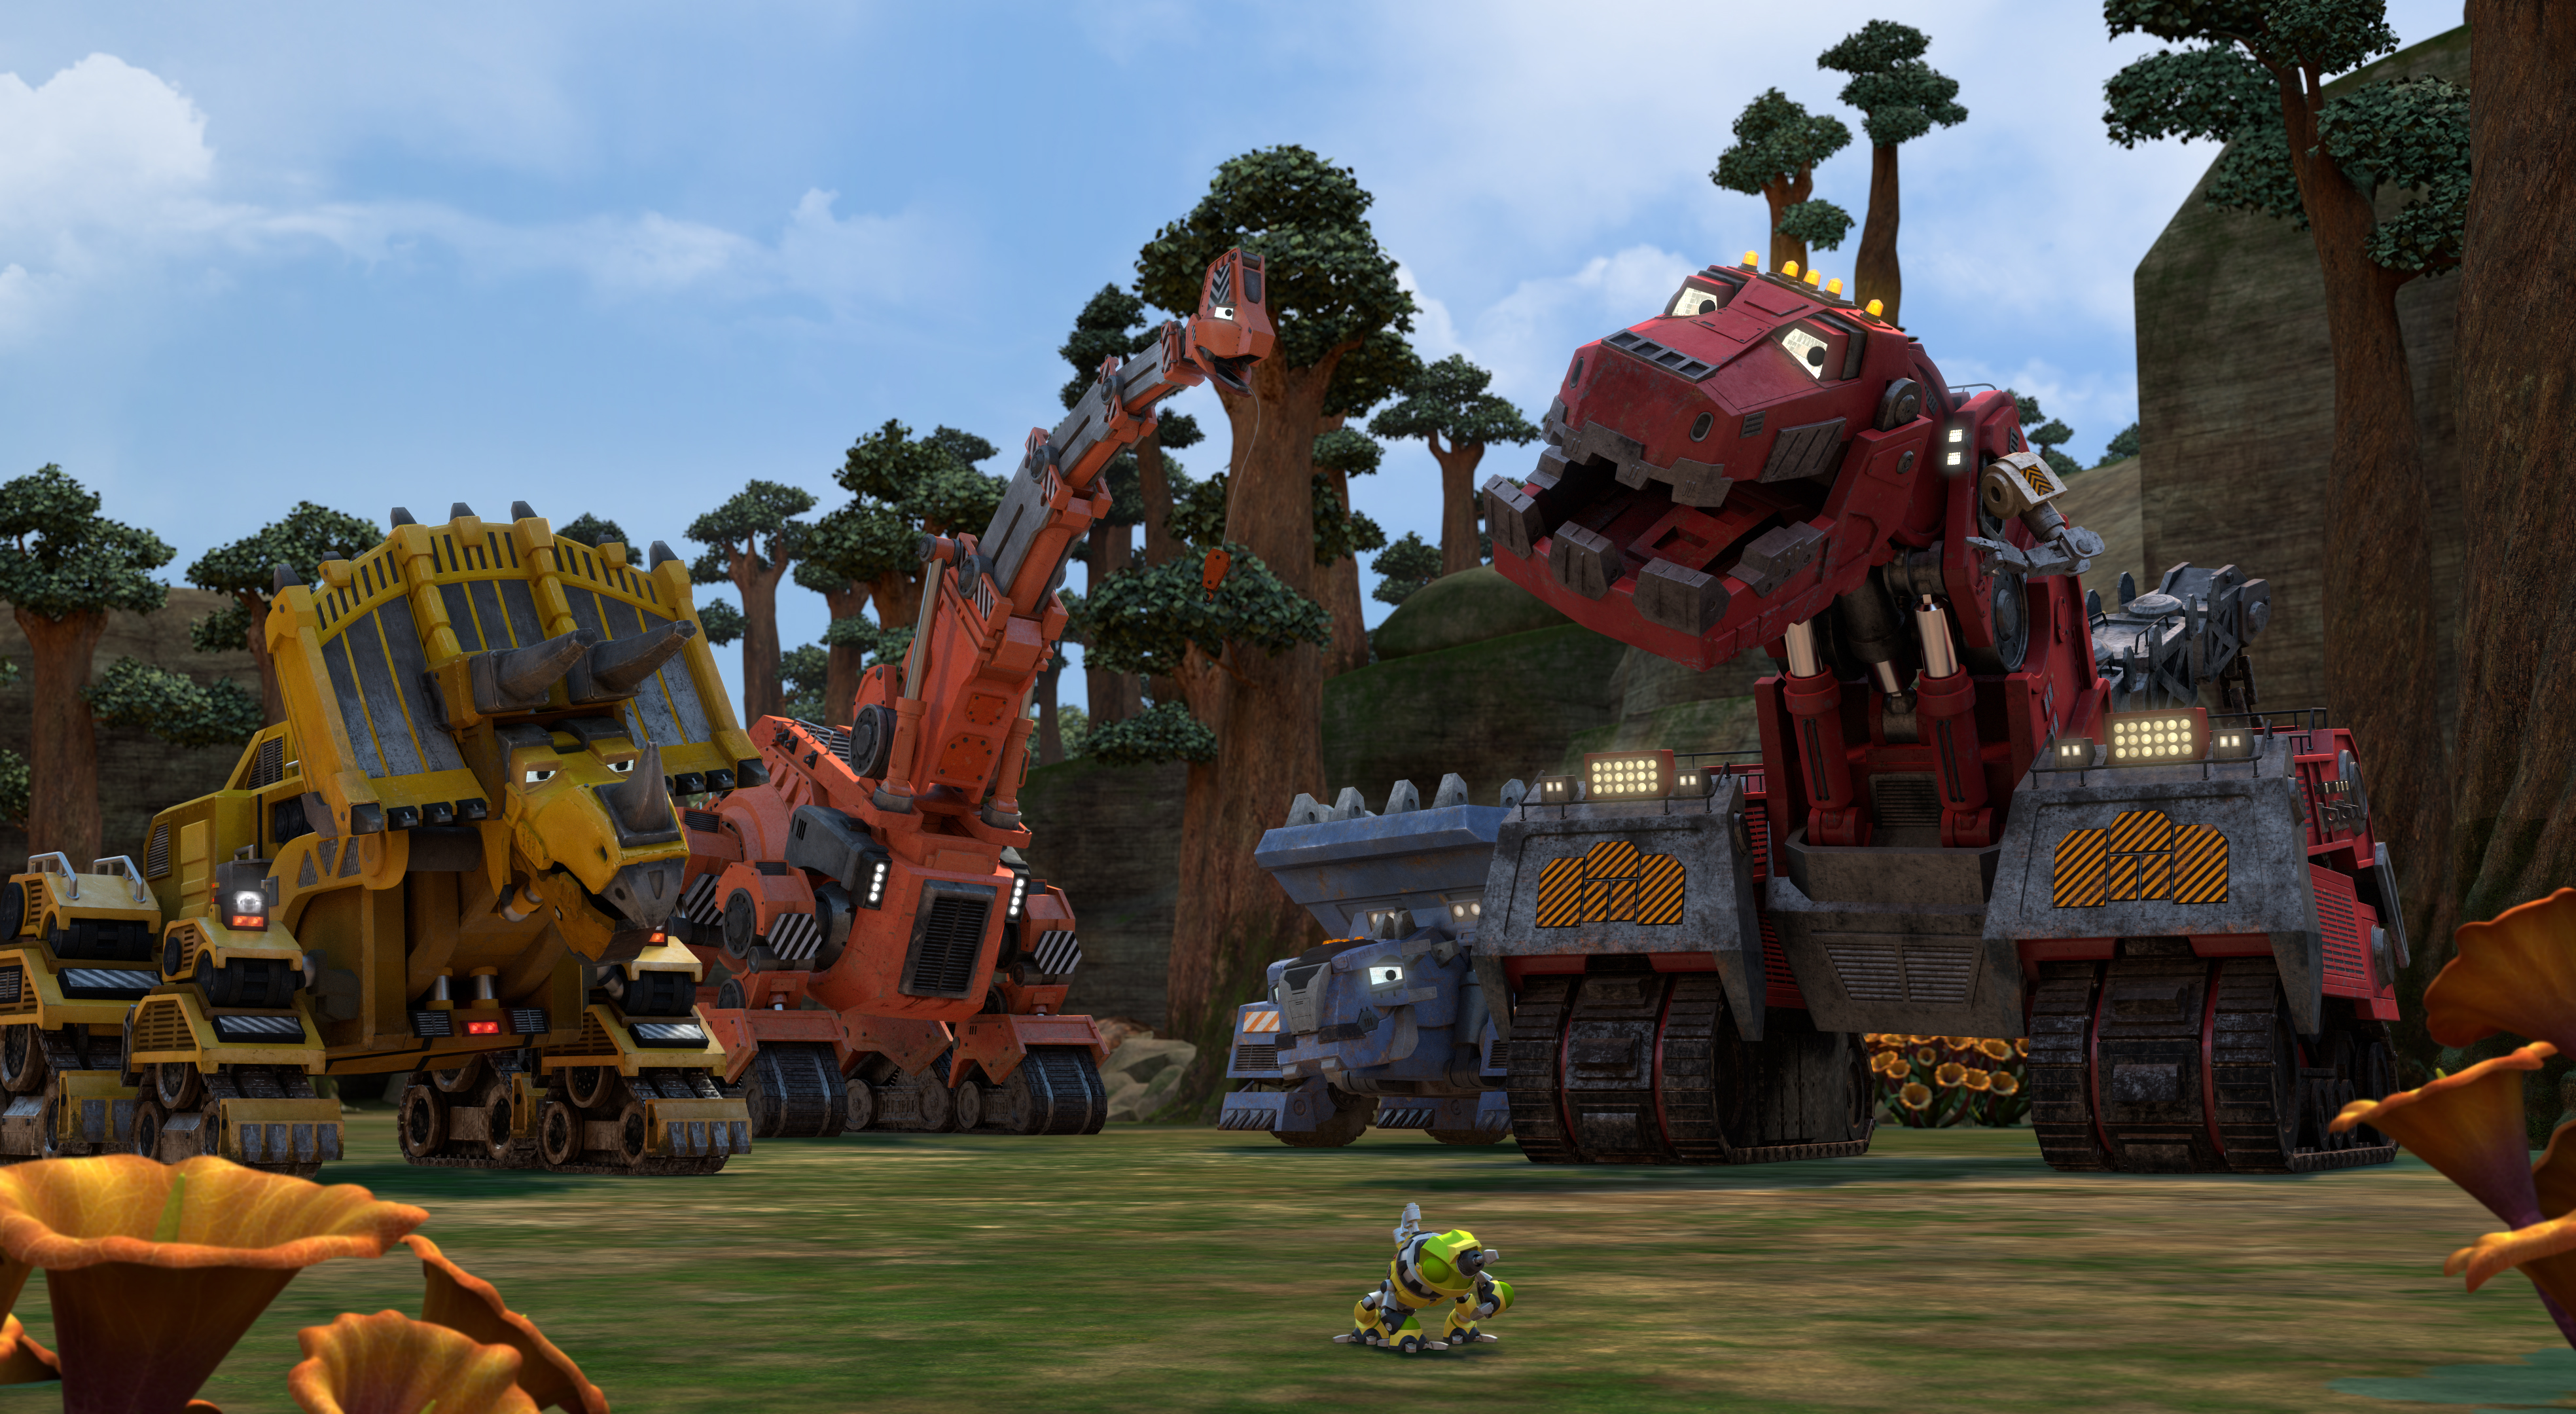 The Final Season of Dinotrux Supercharged is now on Netflix